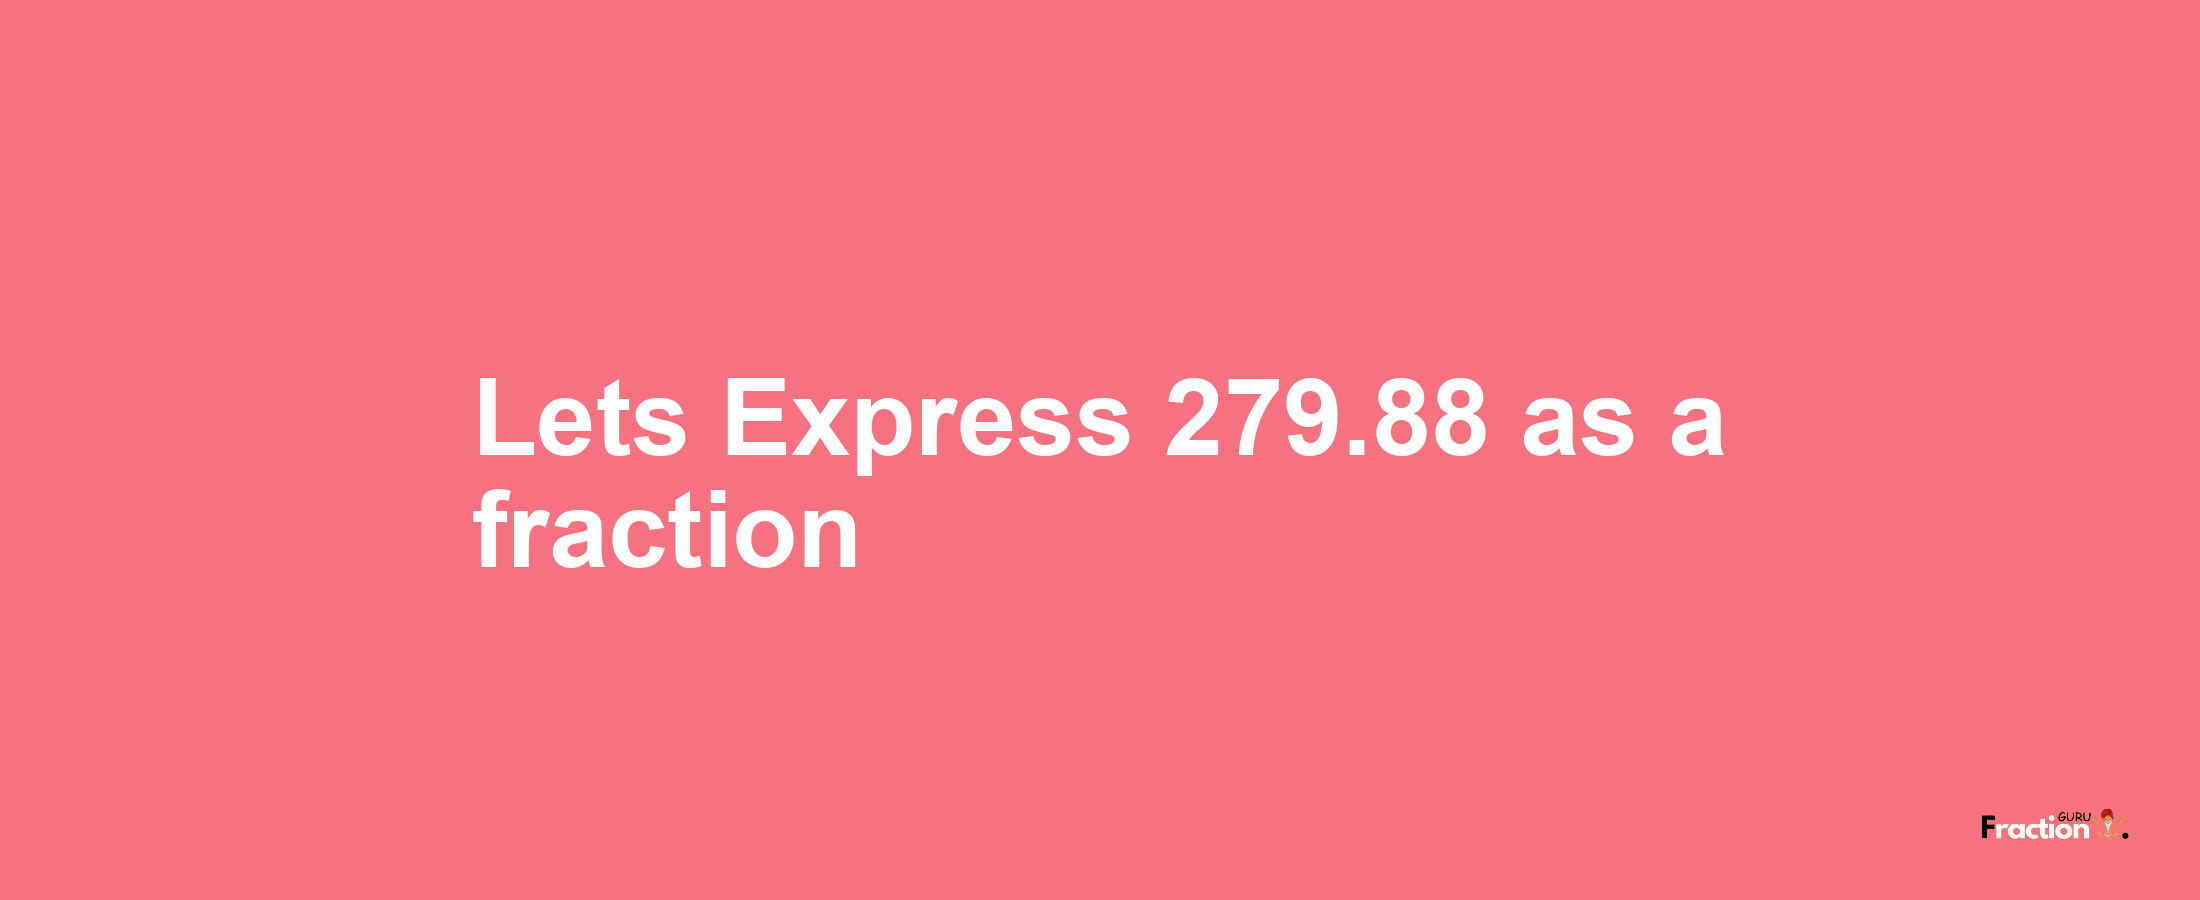 Lets Express 279.88 as afraction